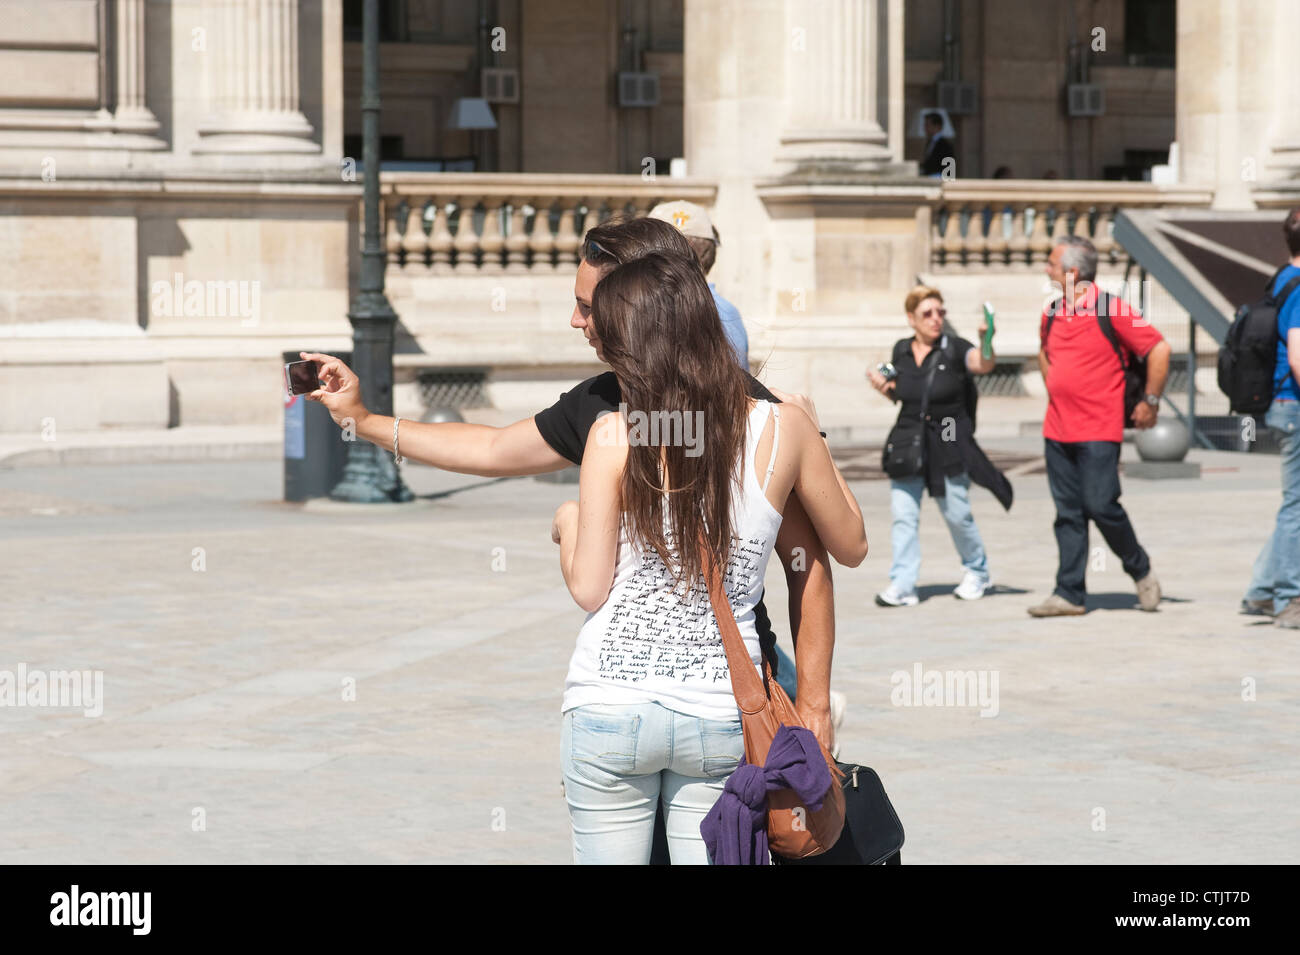 Paris, France - Young tourist couple taking photo of themselves Stock Photo